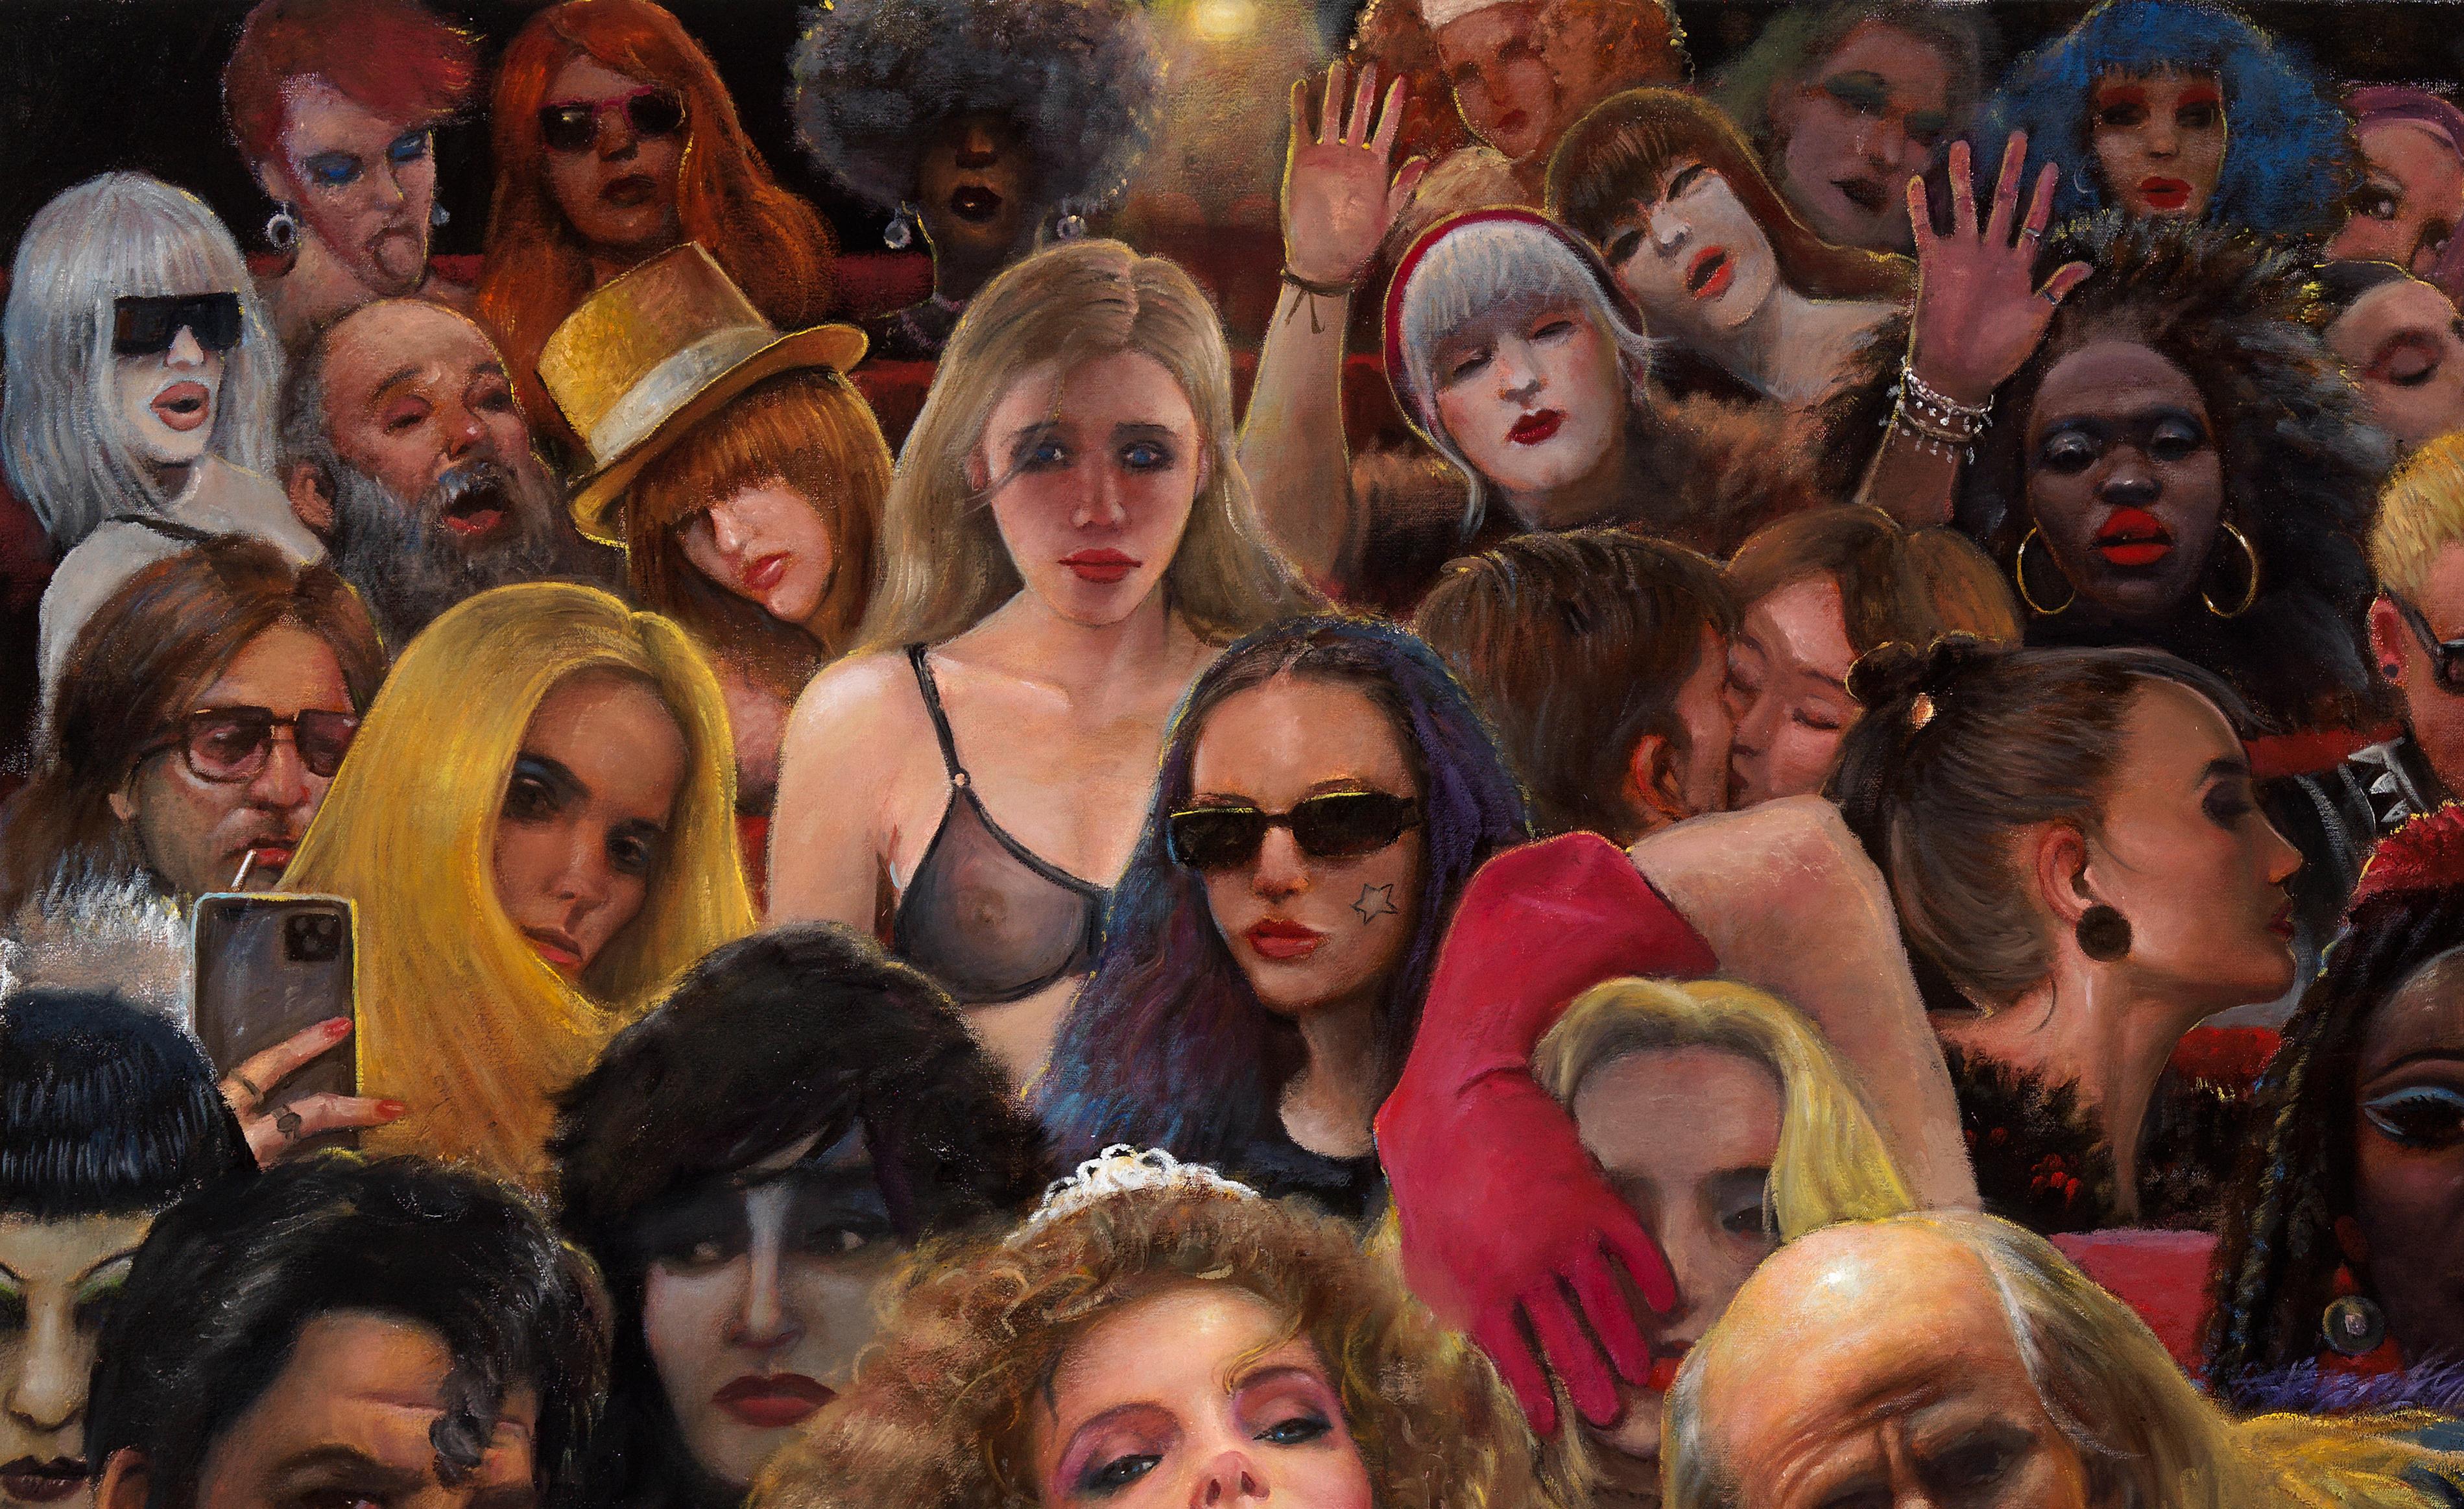 On Stage It's Okay to Be Different - An Homage to the Rocky Horror Picture Show - Contemporary Painting by Bruno Surdo